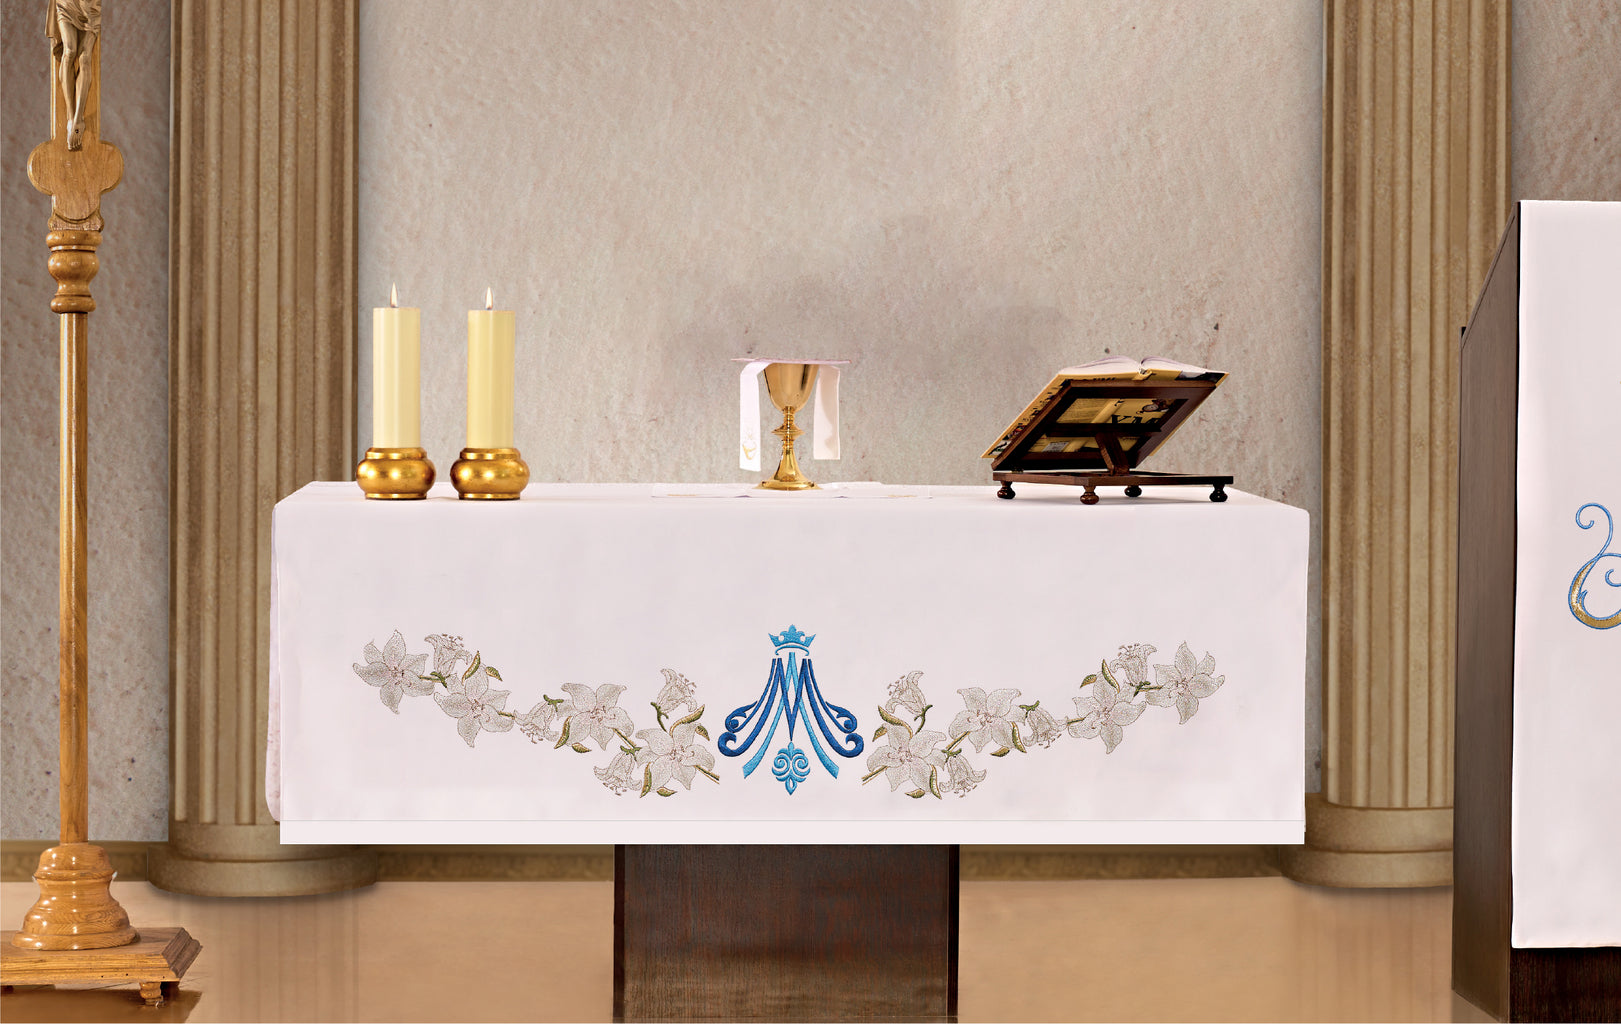 Altar cloth with front embroidery in blue with Mary motif